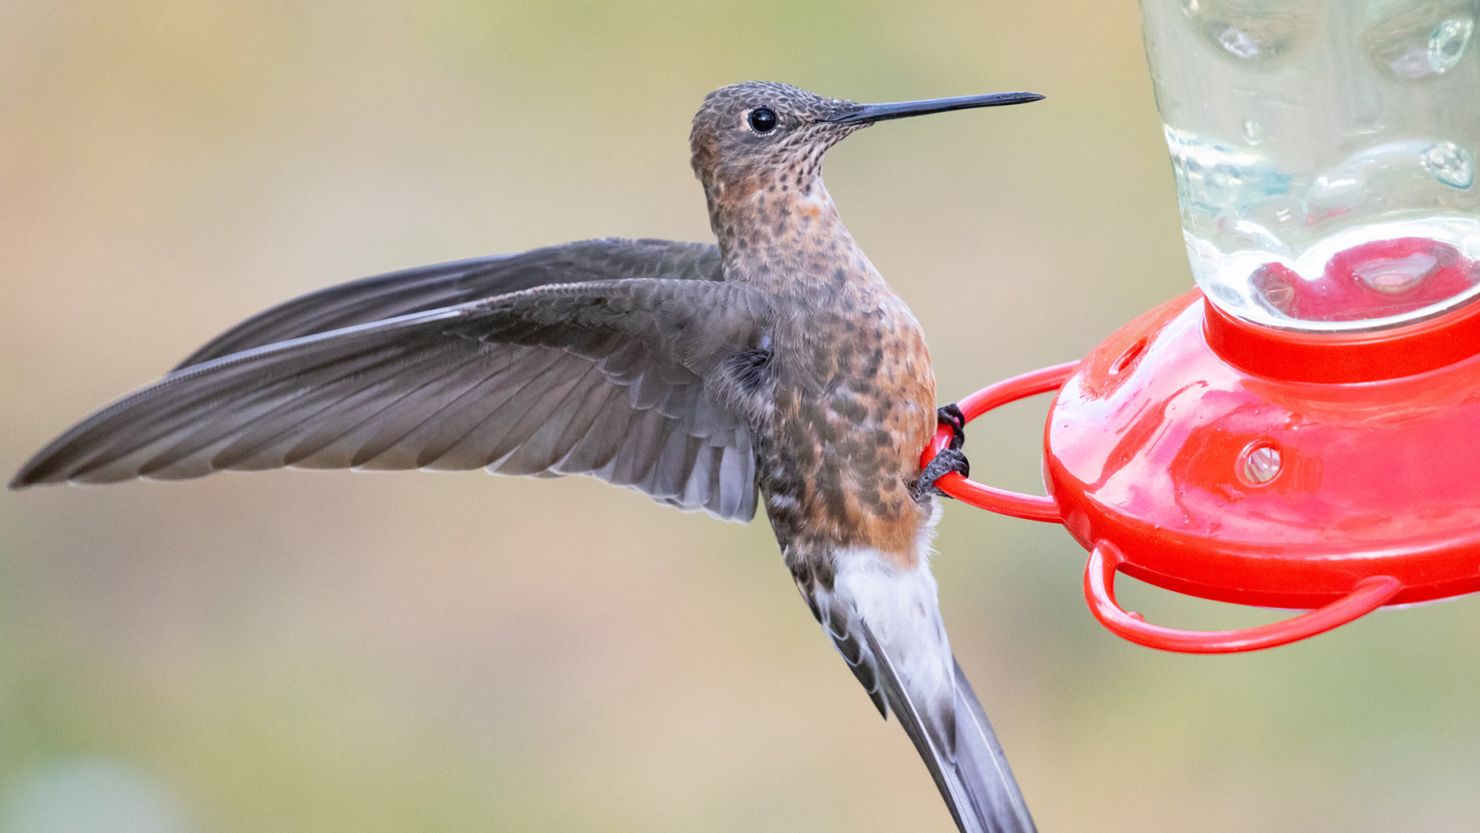 A northern giant hummingbird can be seen attempting to alight on a traditional hummingbird feeder, which is designed for birds that are eight times smaller.